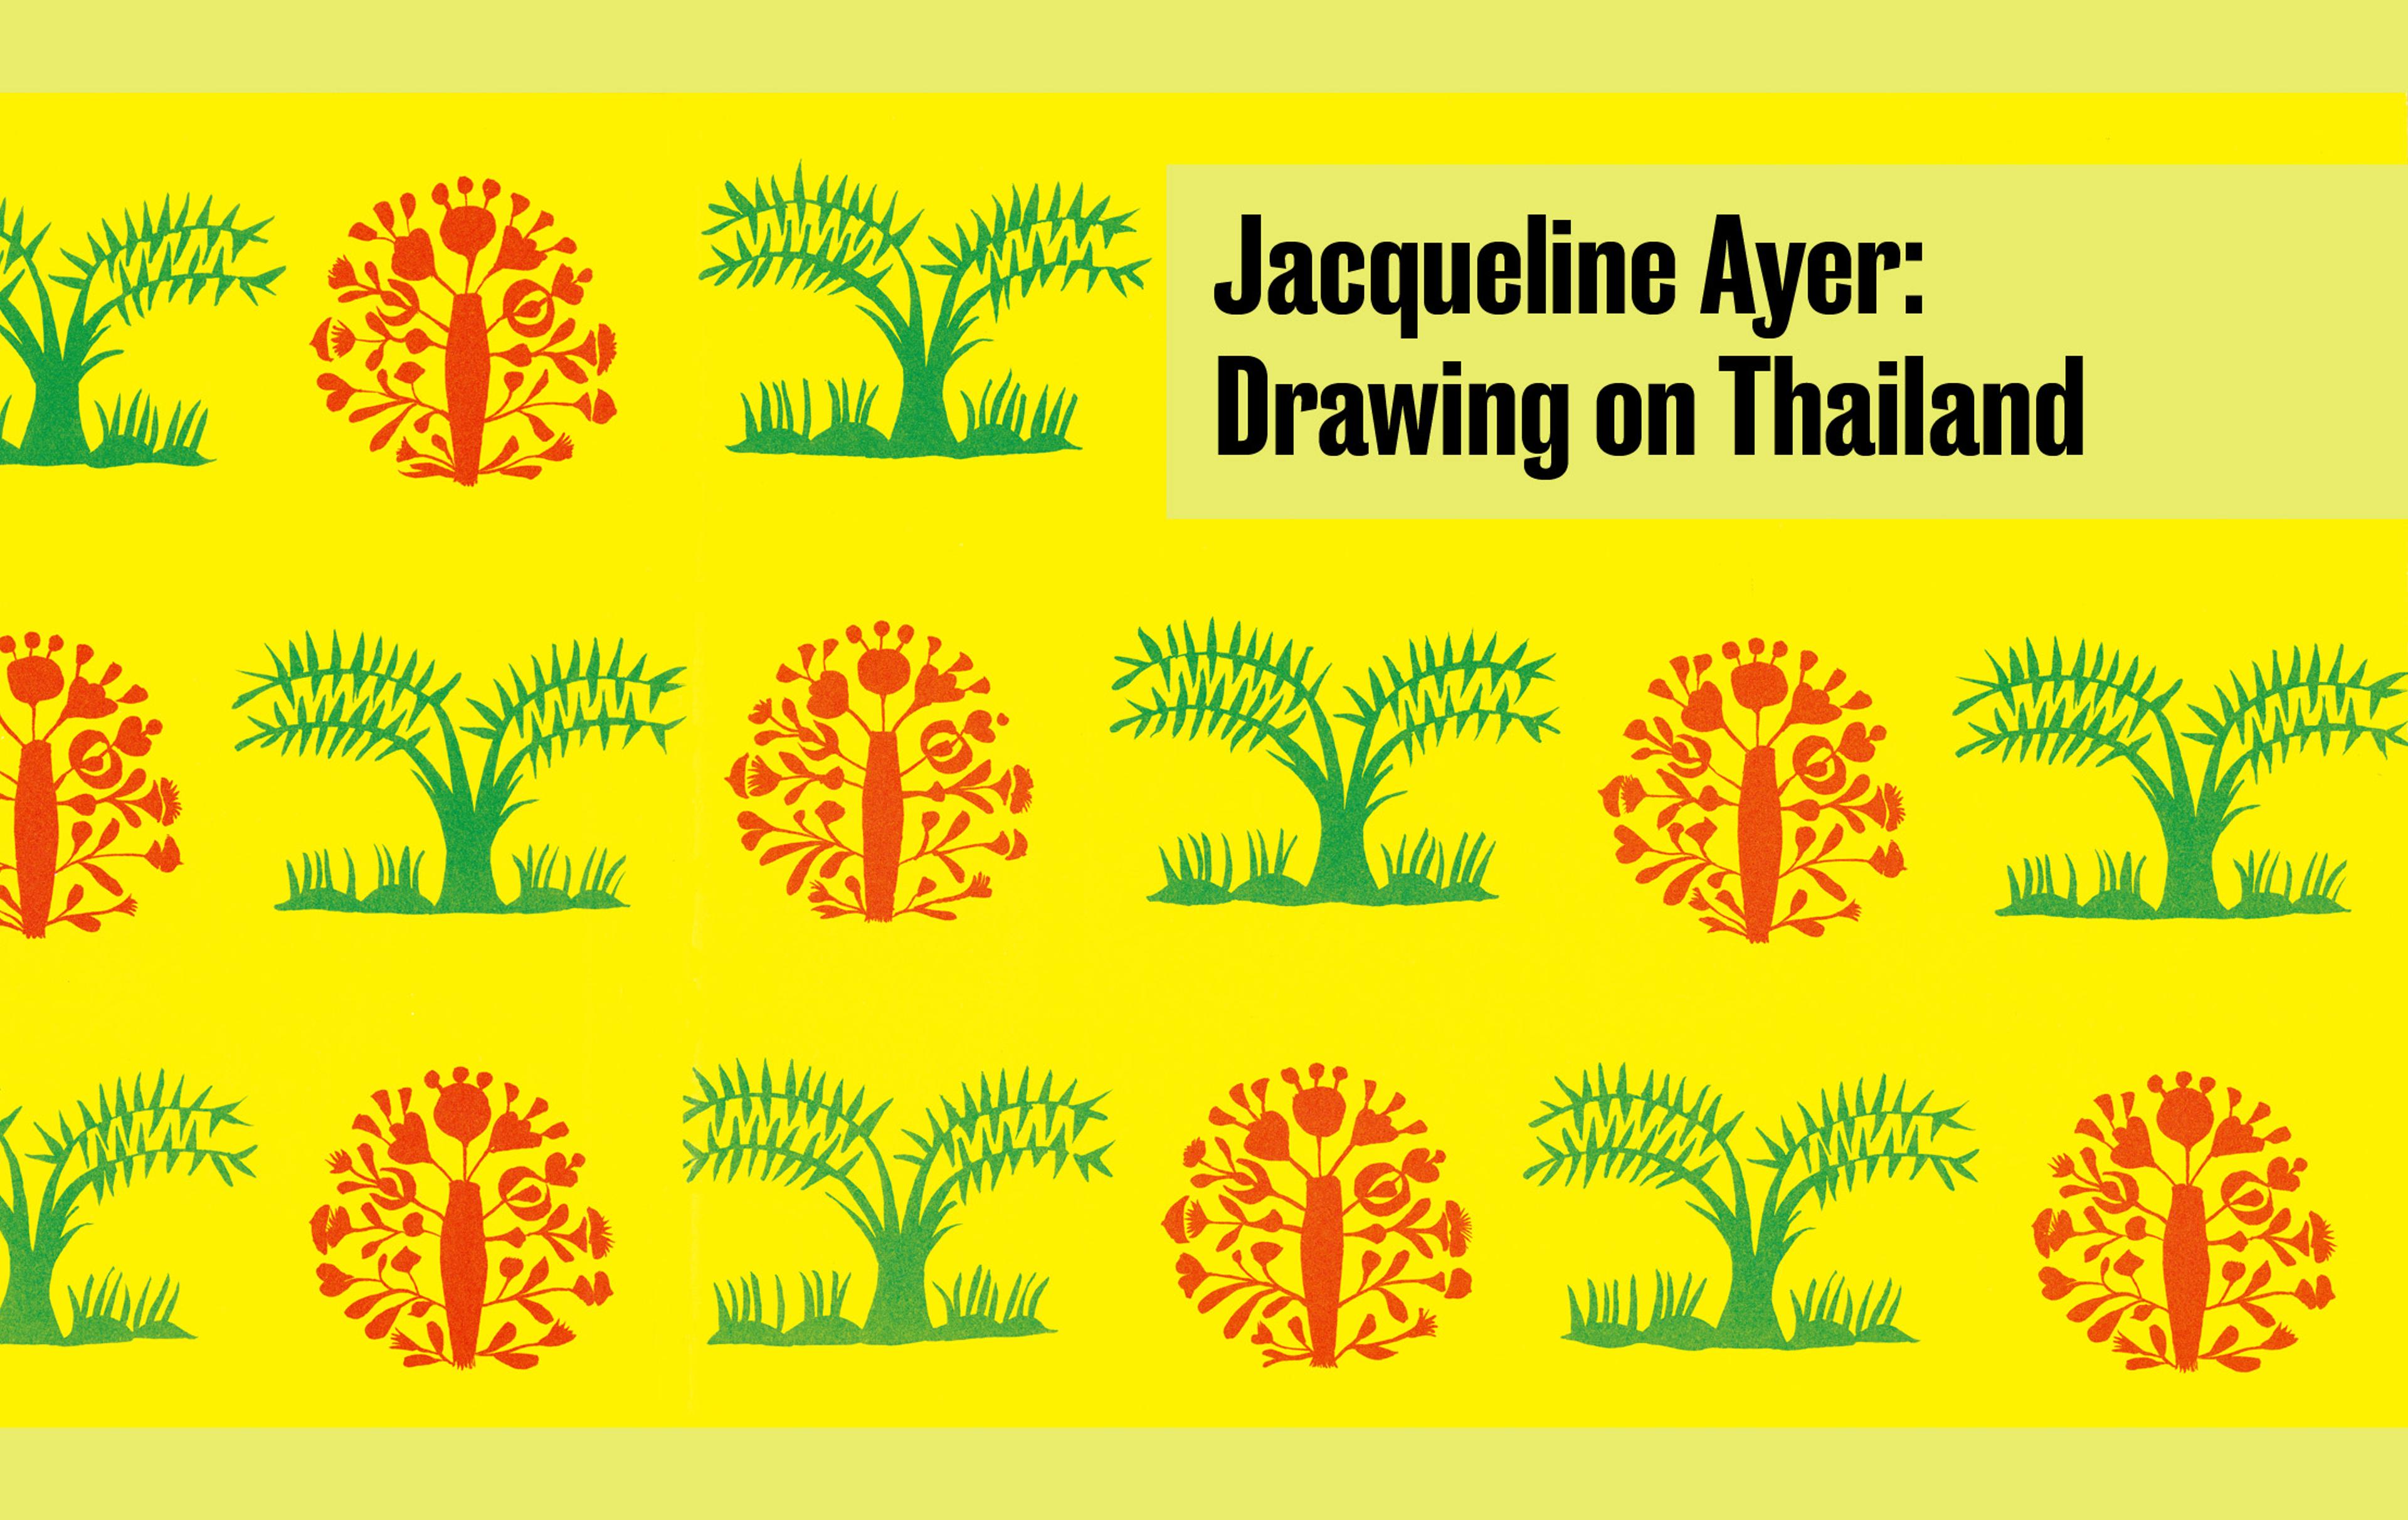 Yellow background with bright red and bright green silhouettes of trees and flower emblems. Title reads 'Jacqueline Ayer: Drawing on Thailand'